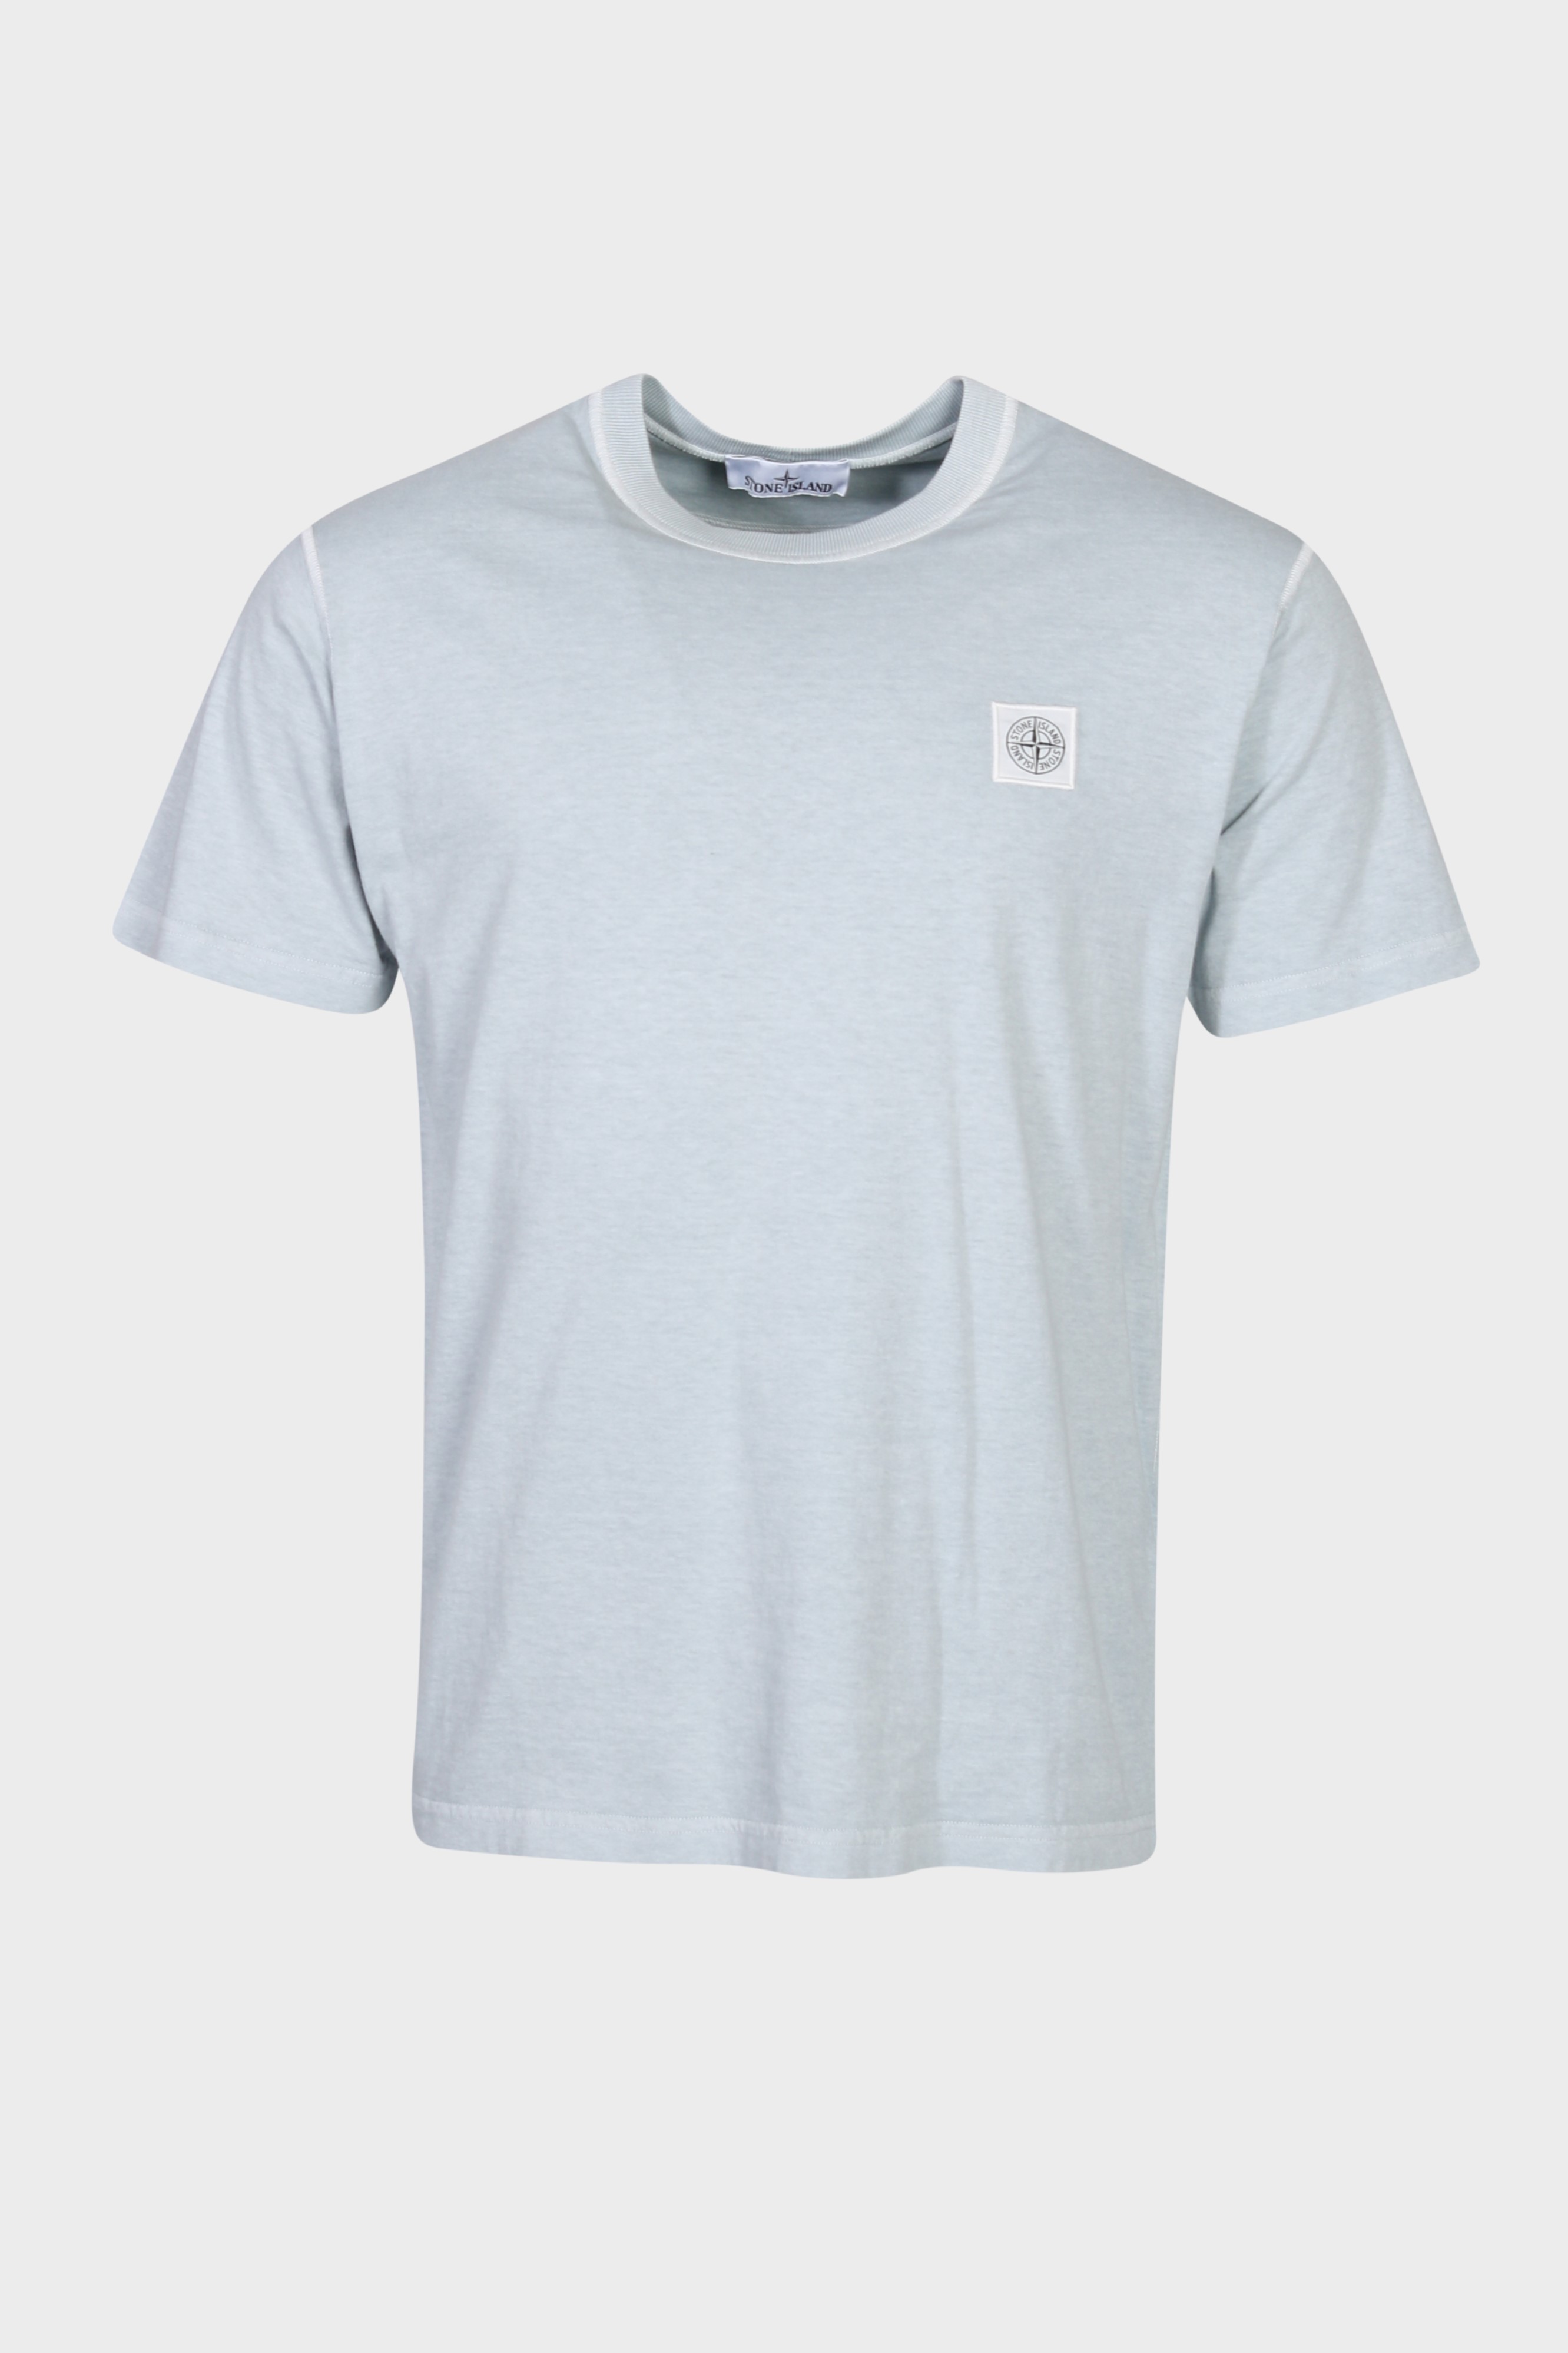 STONE ISLAND T-Shirt in Washed Sky Blue